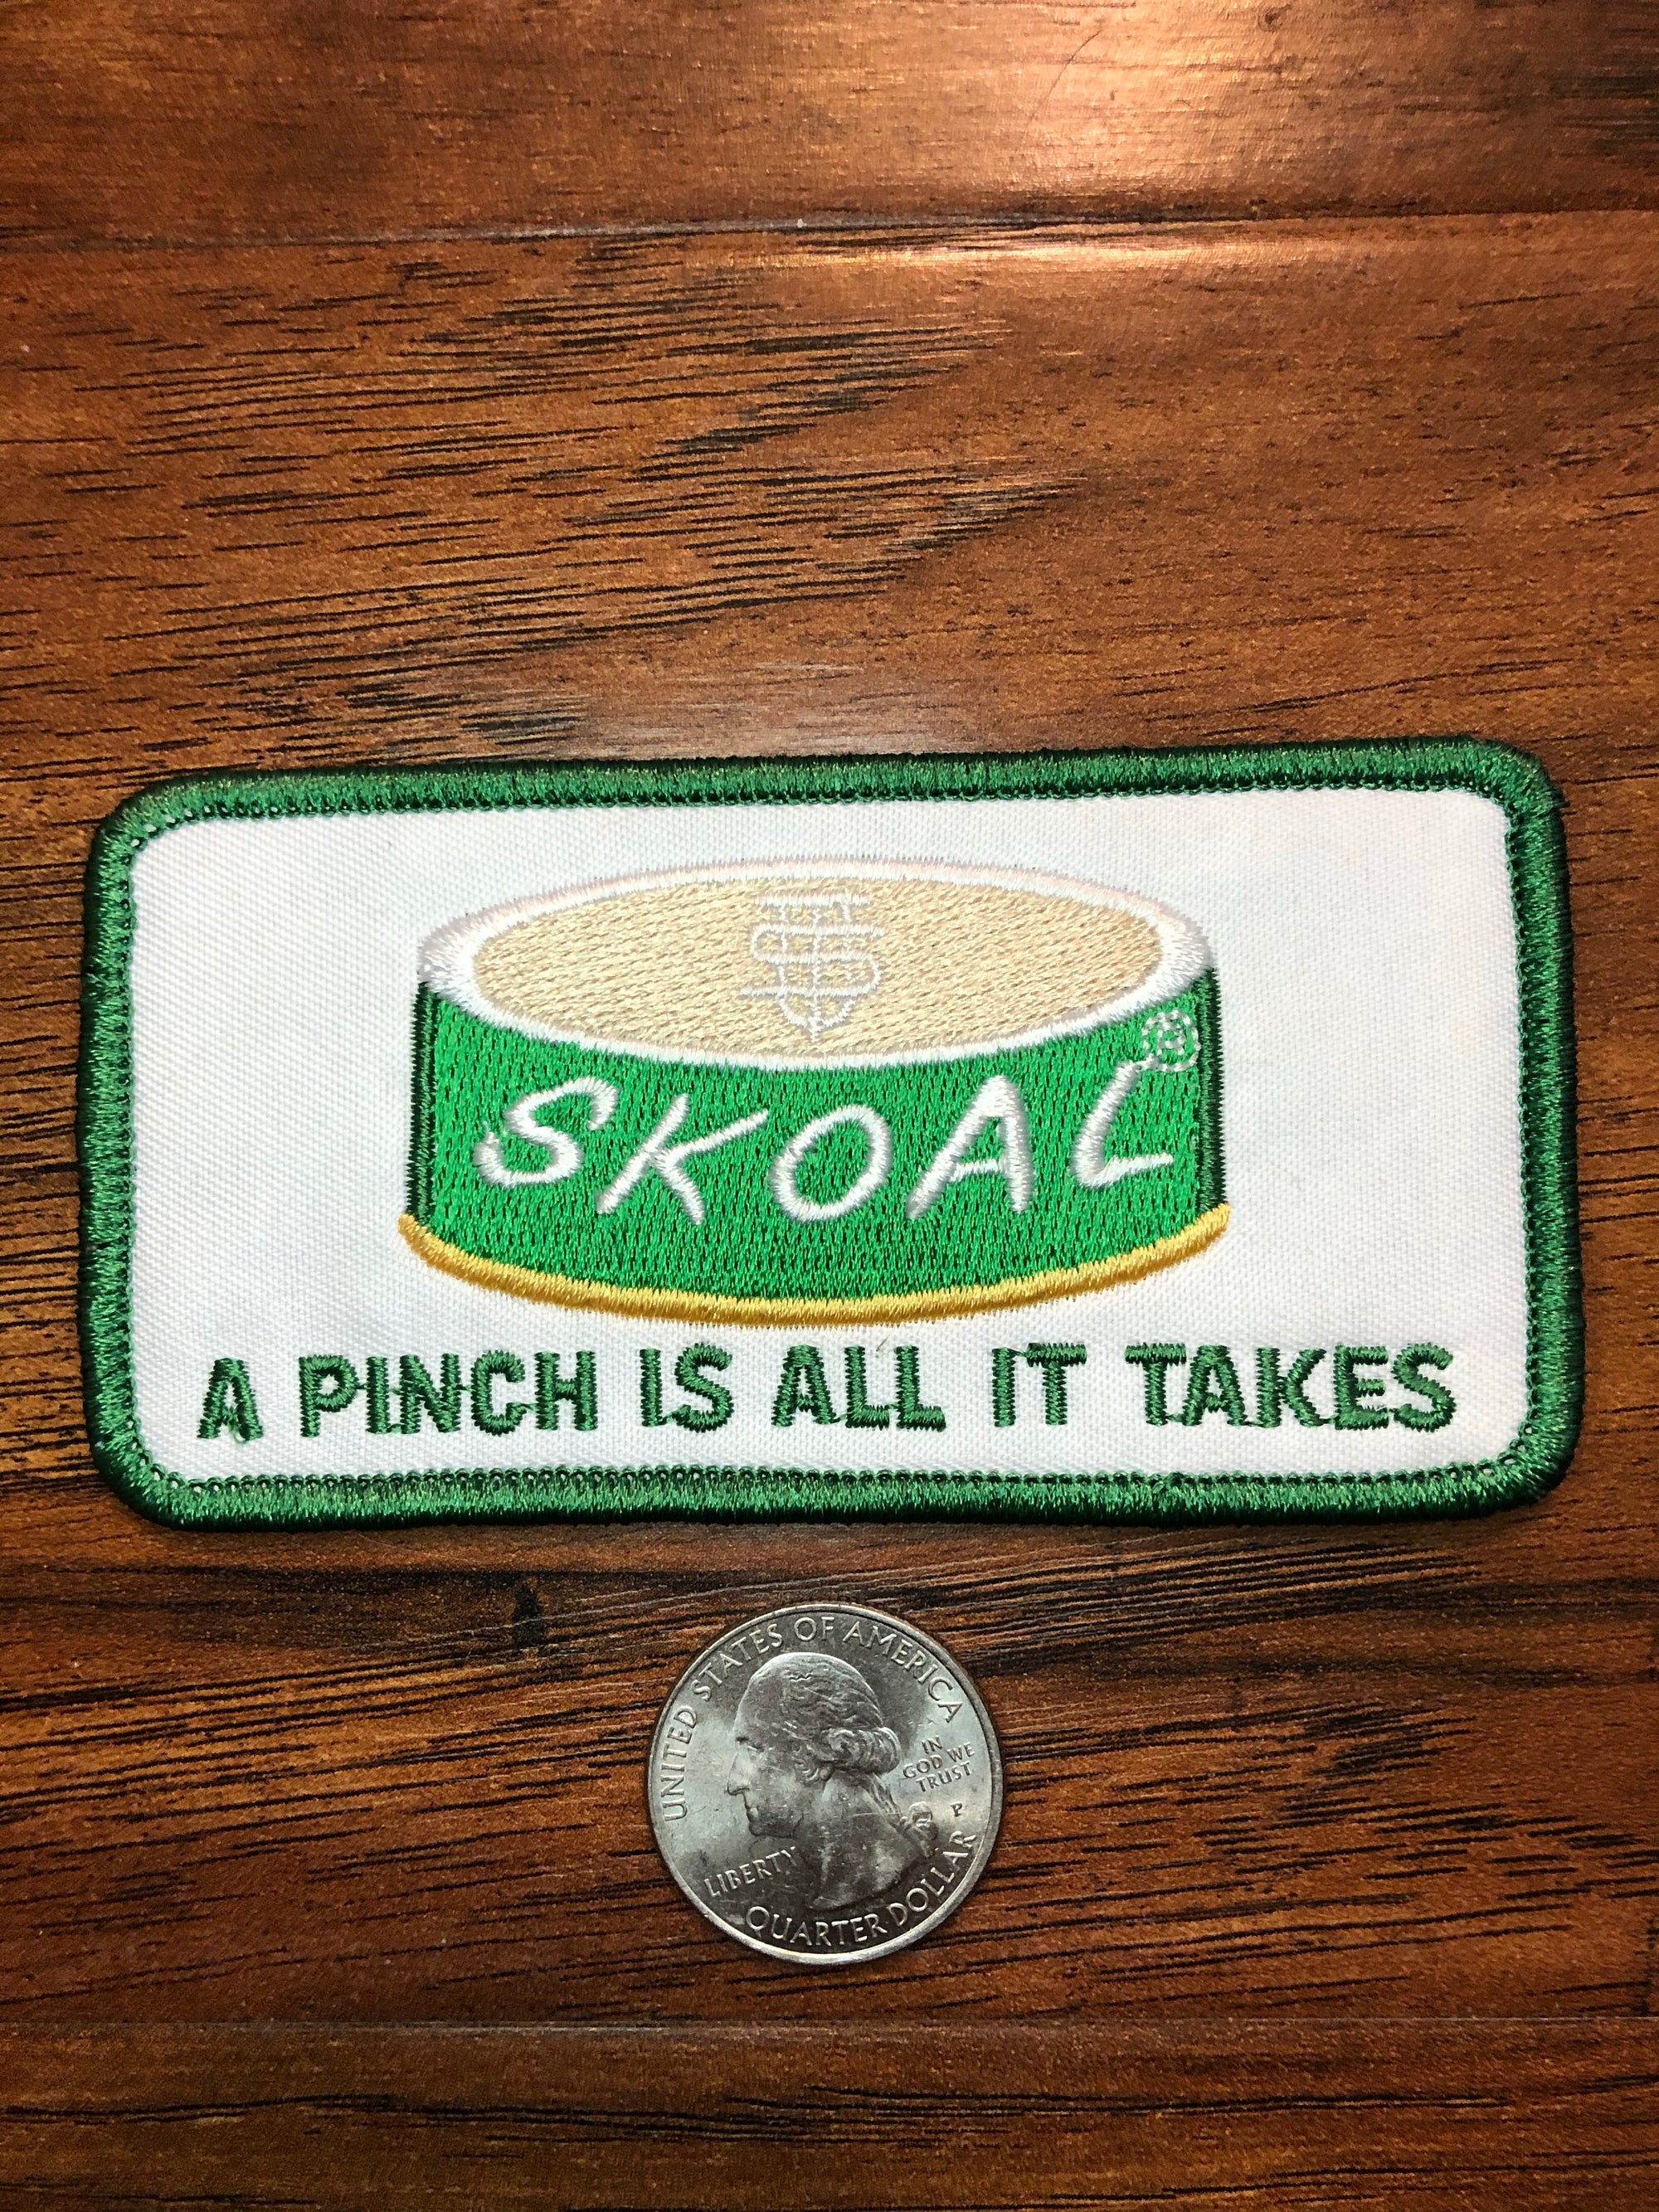 Skoal “ A Pinch Is All It Takes”